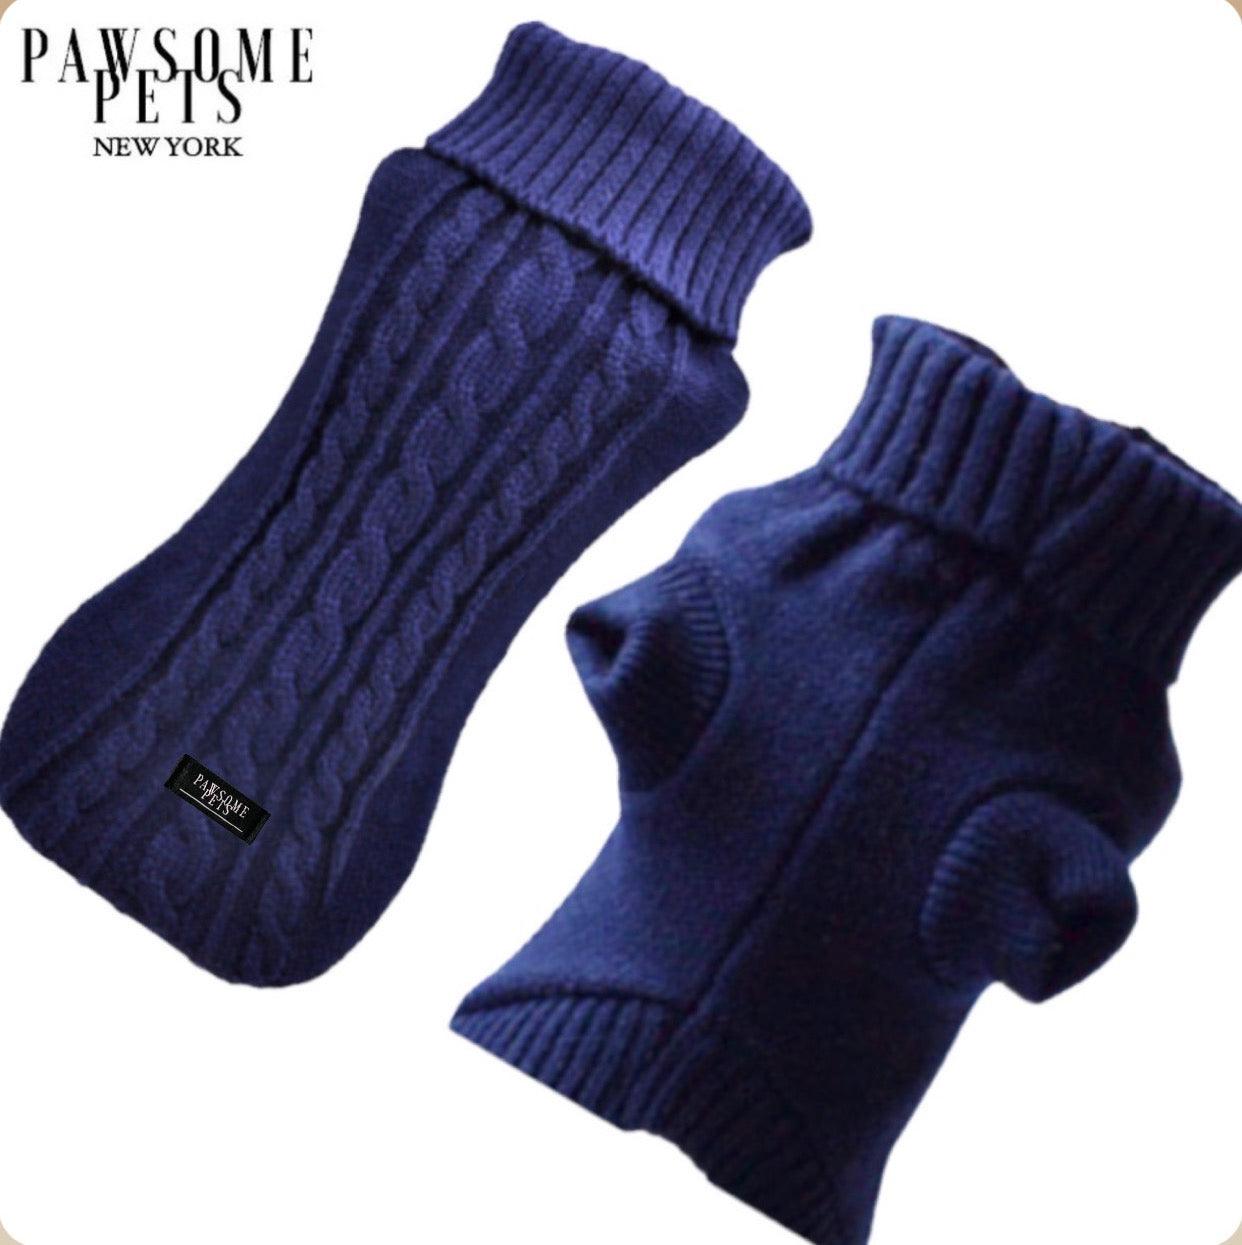 (EXTRA WARM) DOG AND CAT CABLE KNIT SWEATER - NAVY BLUE-0